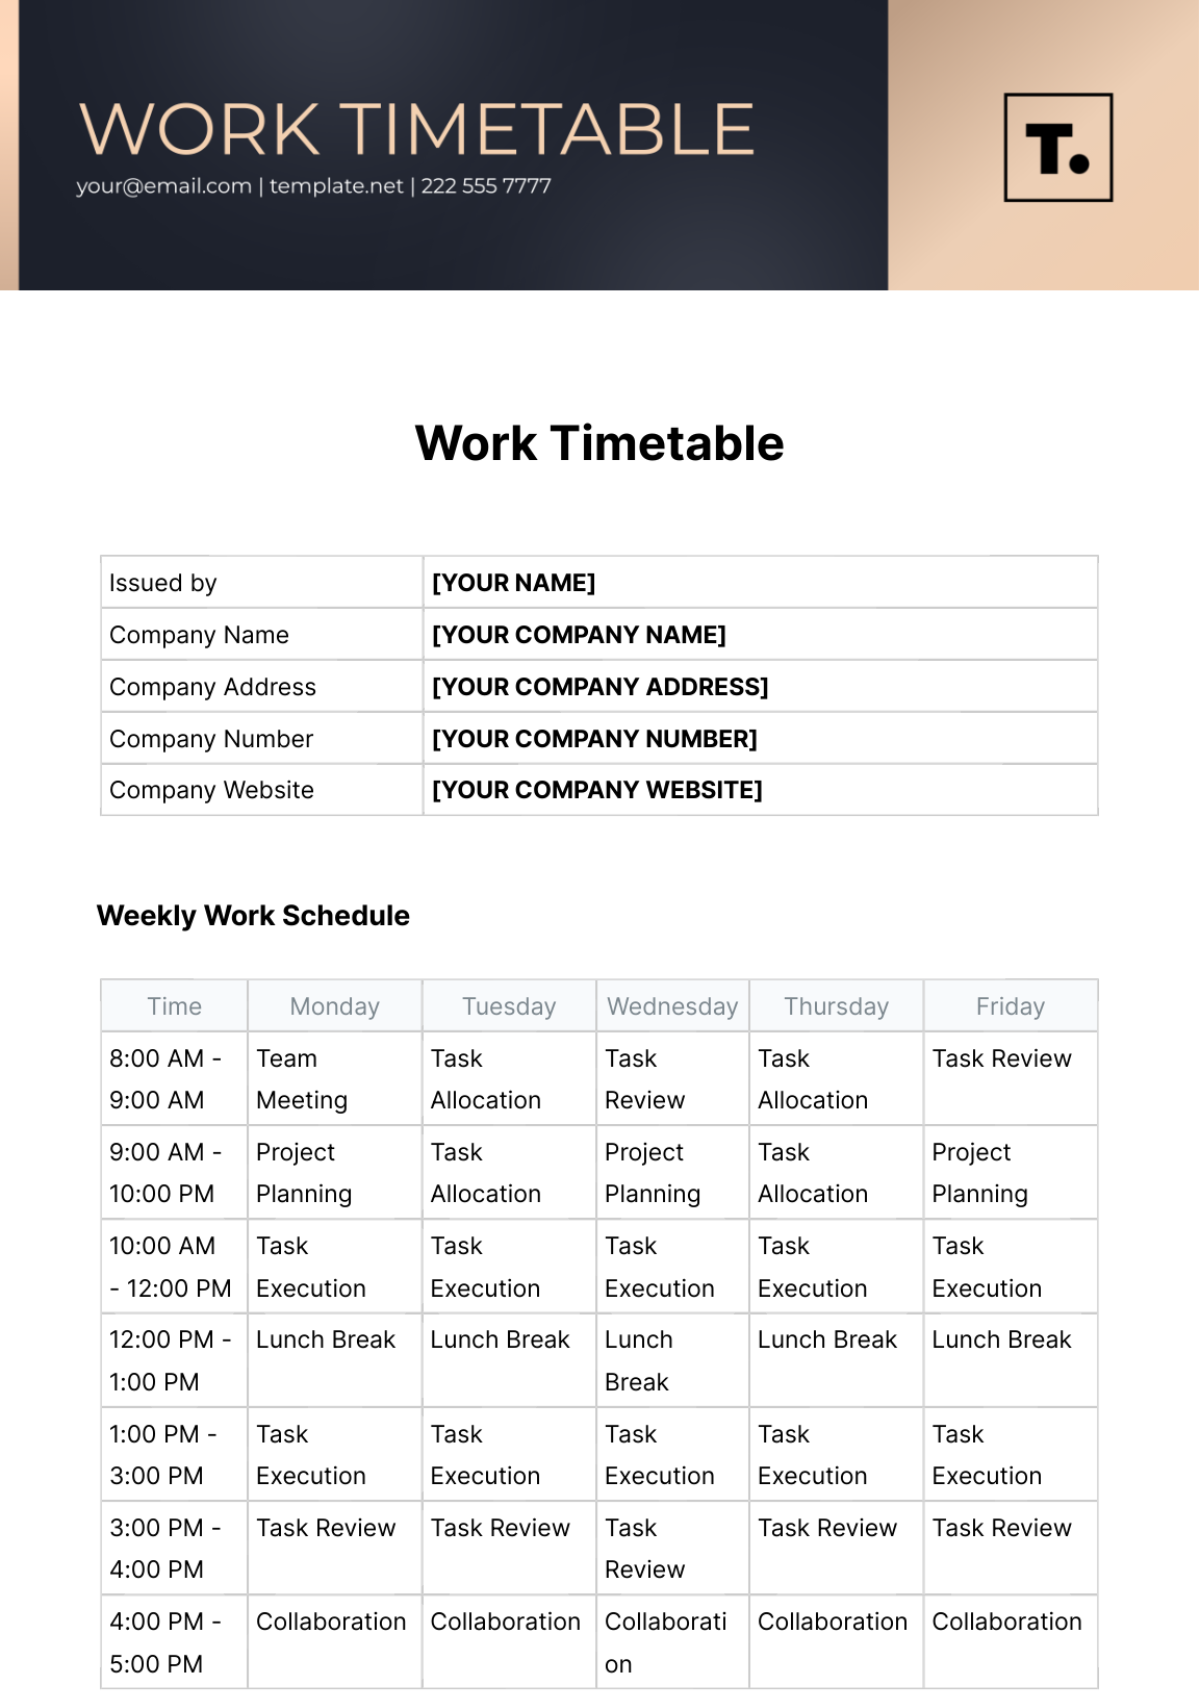 Work Timetable Template